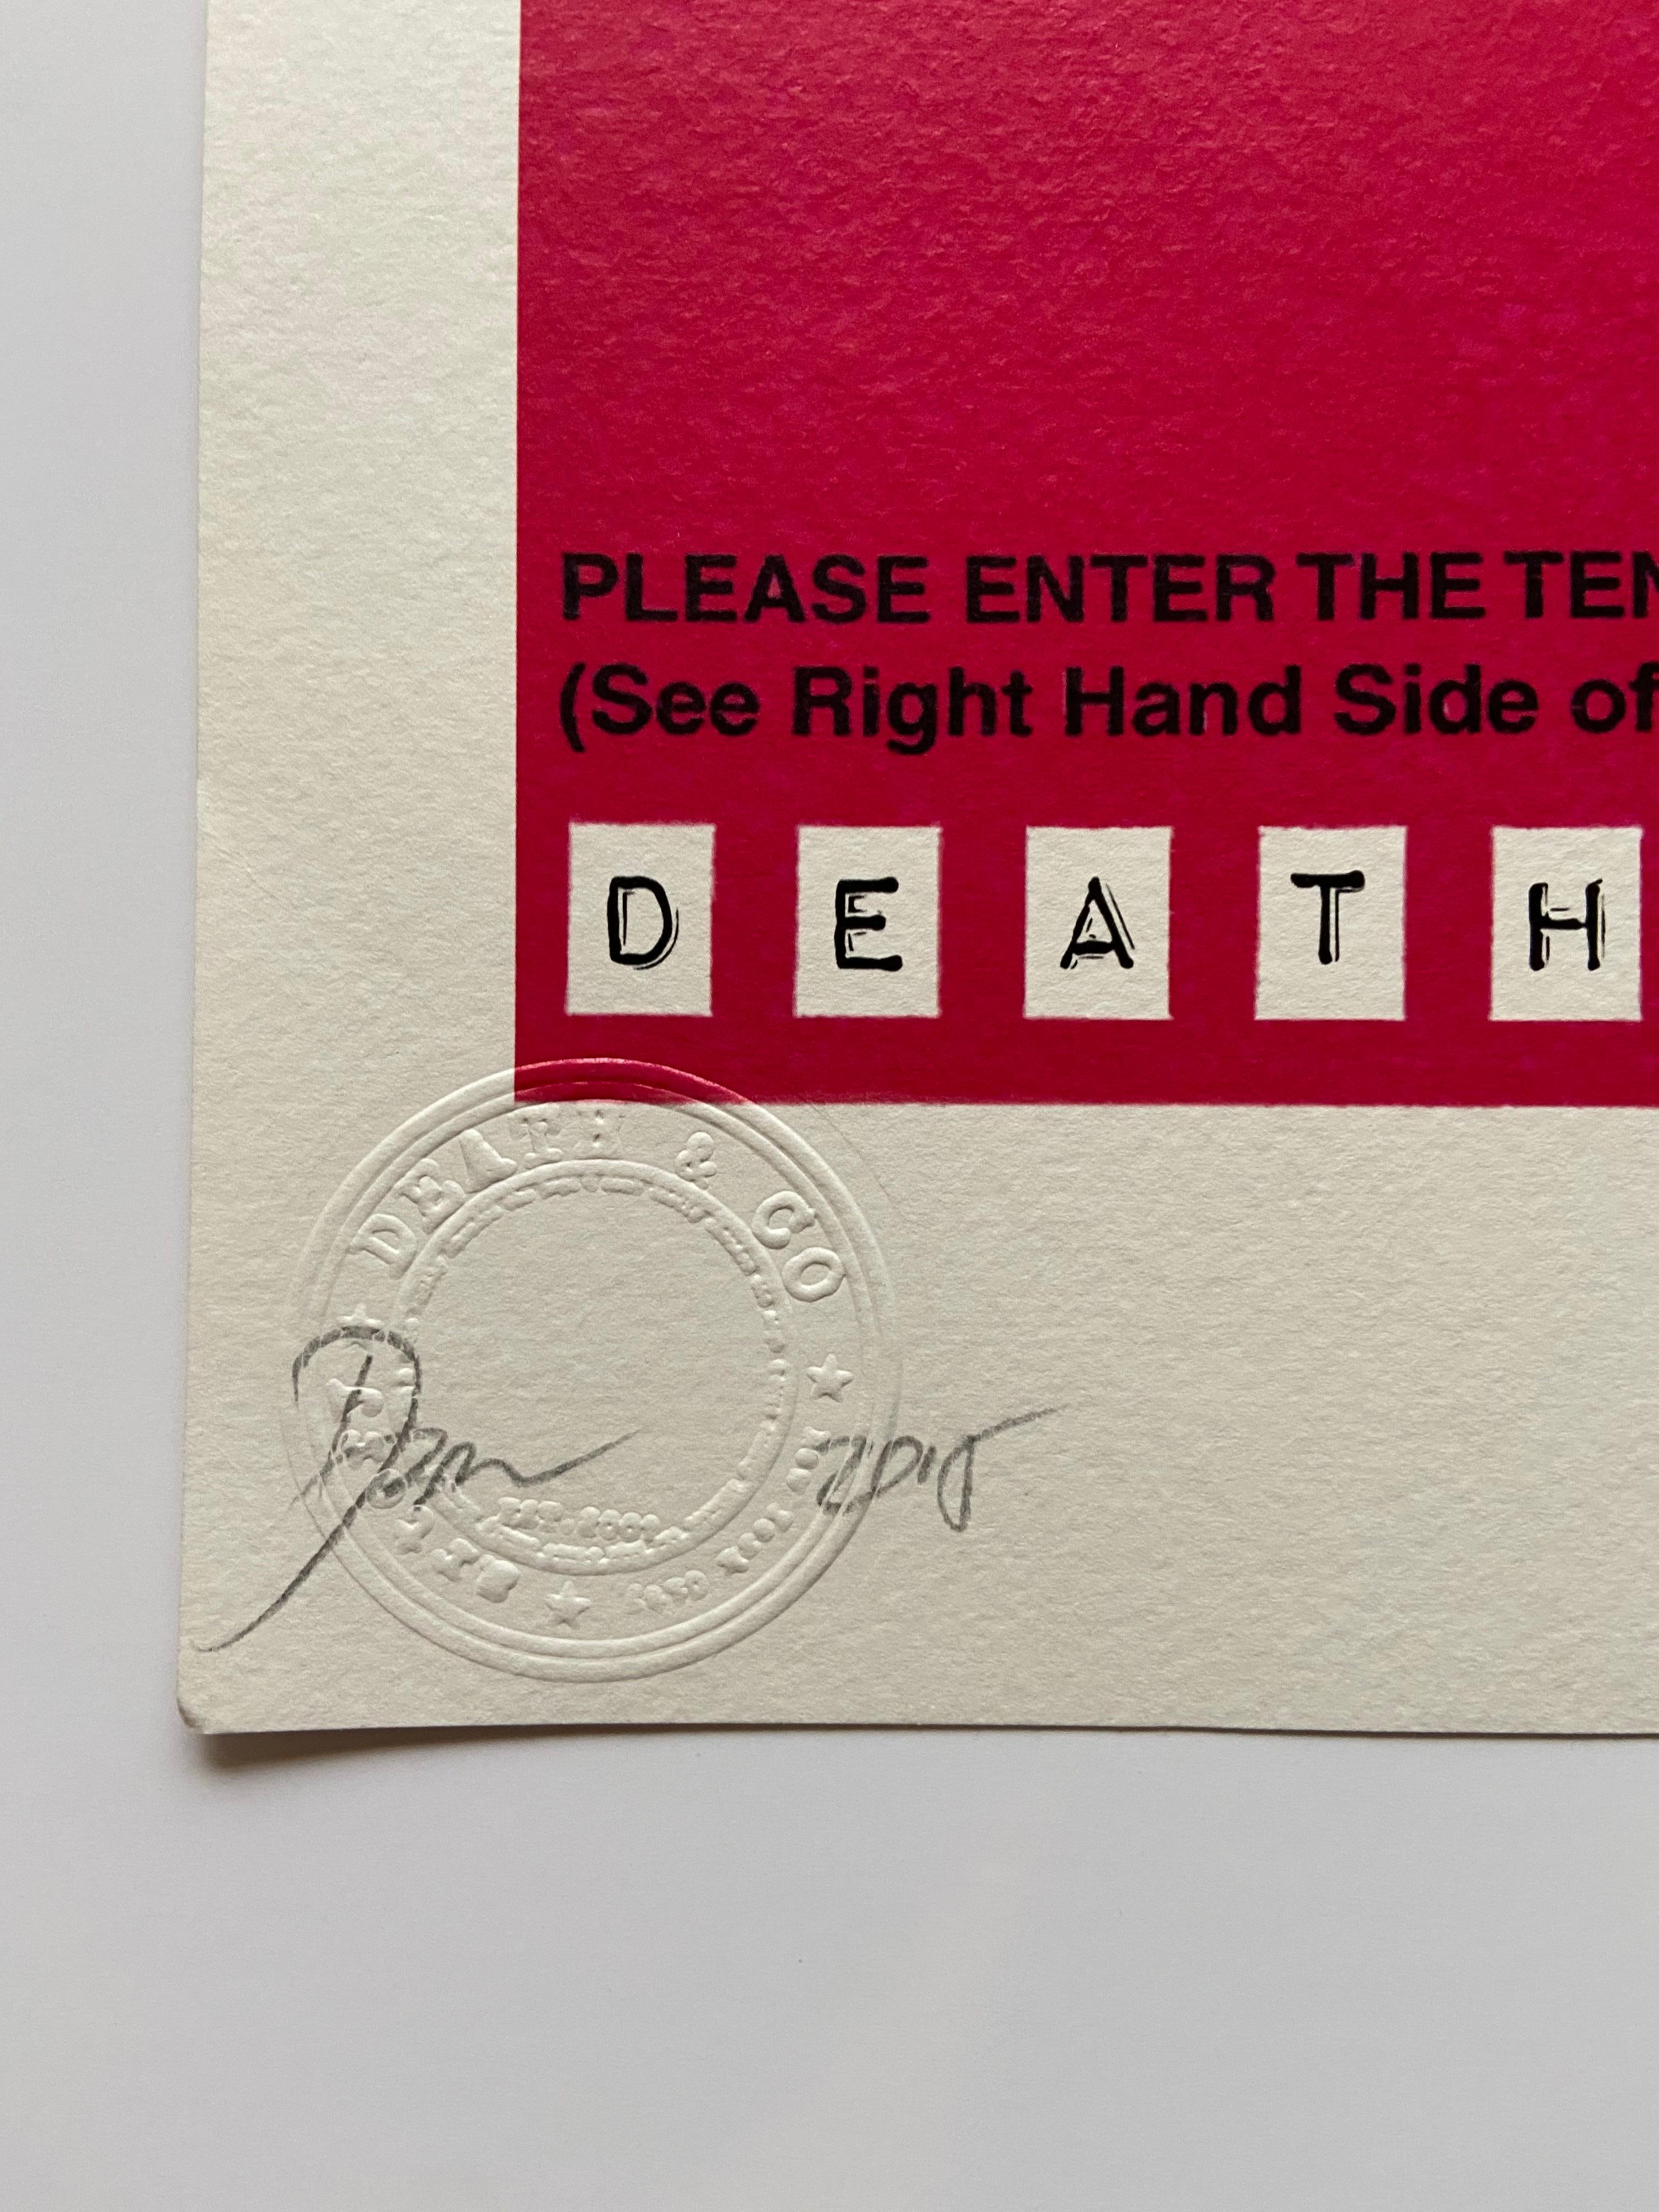 Death NYC - NYC Department of finance - 2015 
Silkscreen print signed, numbered, marked artist's proof and dated in pencil
Dry stamp
2 artist's certificates
45 x 32 cms 
129 euros 